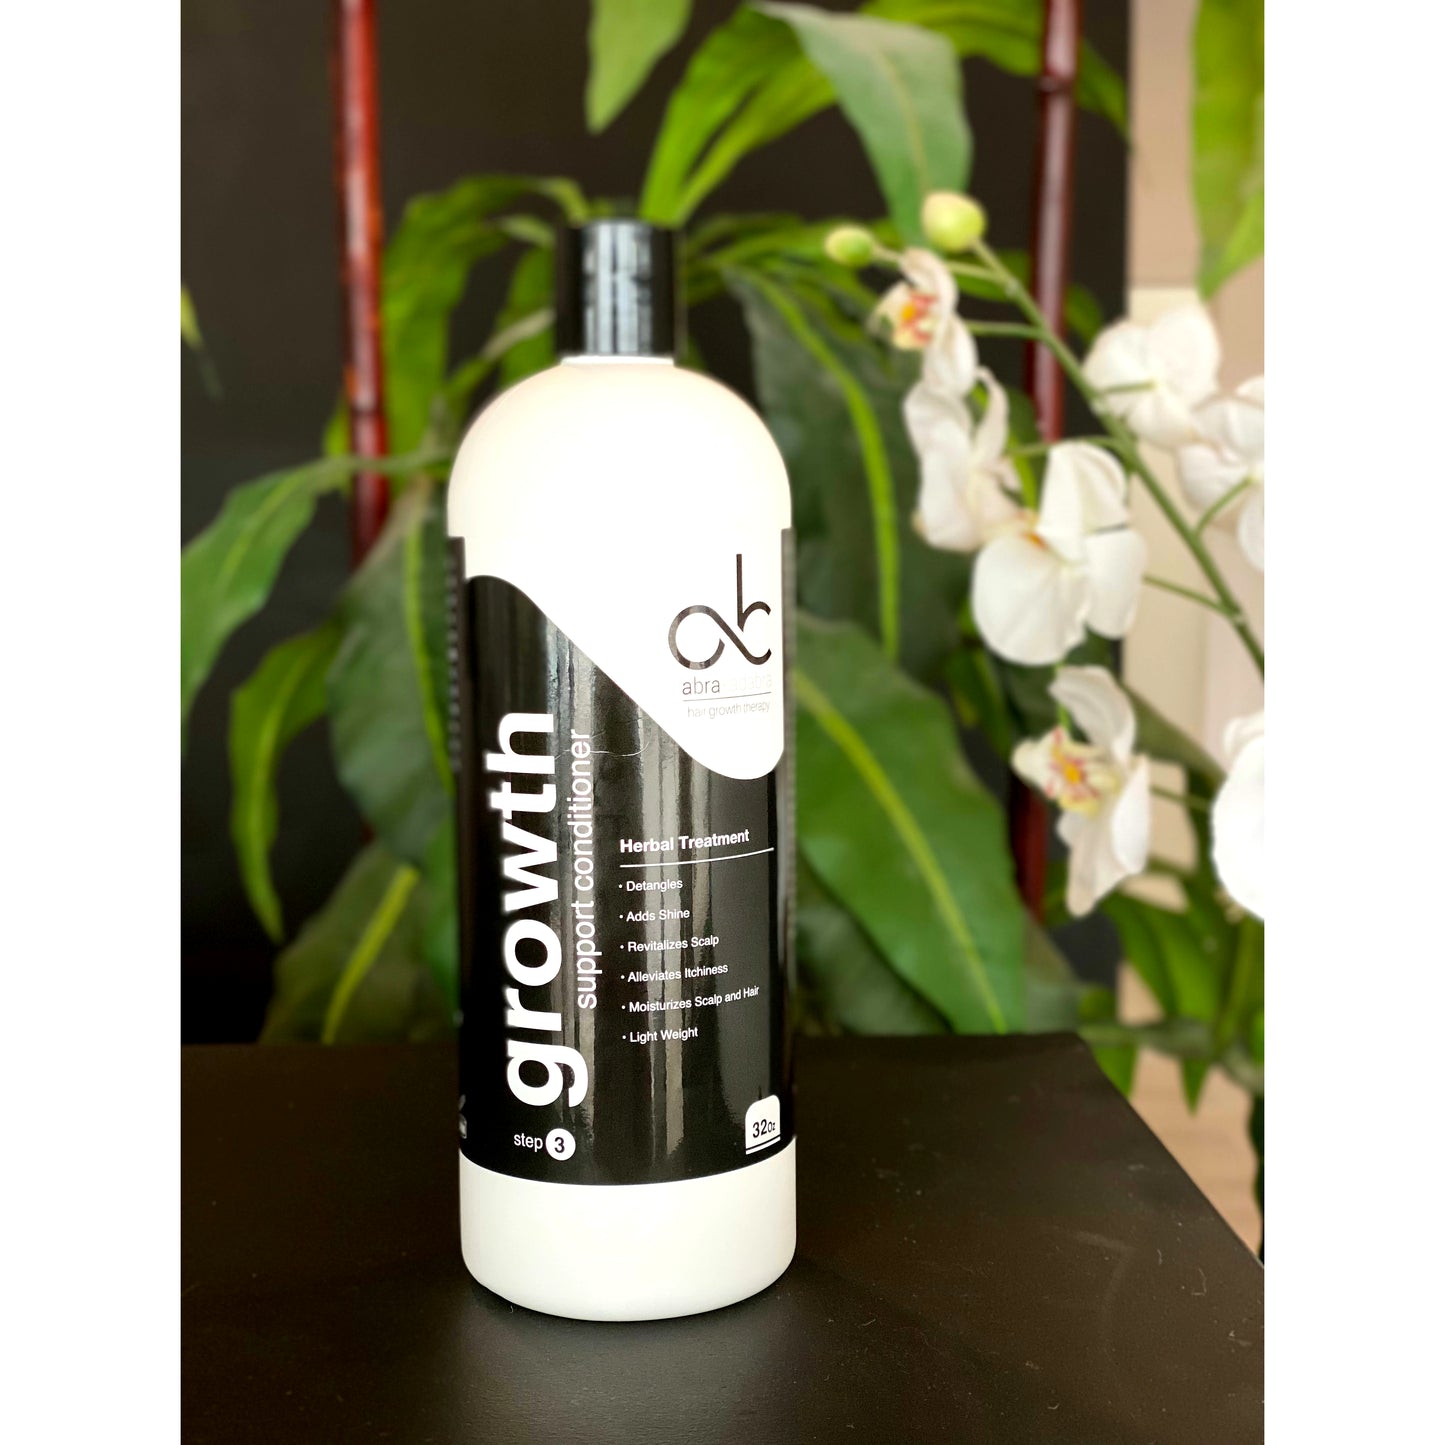 Growth Support Conditioner 32oz (Best Value)